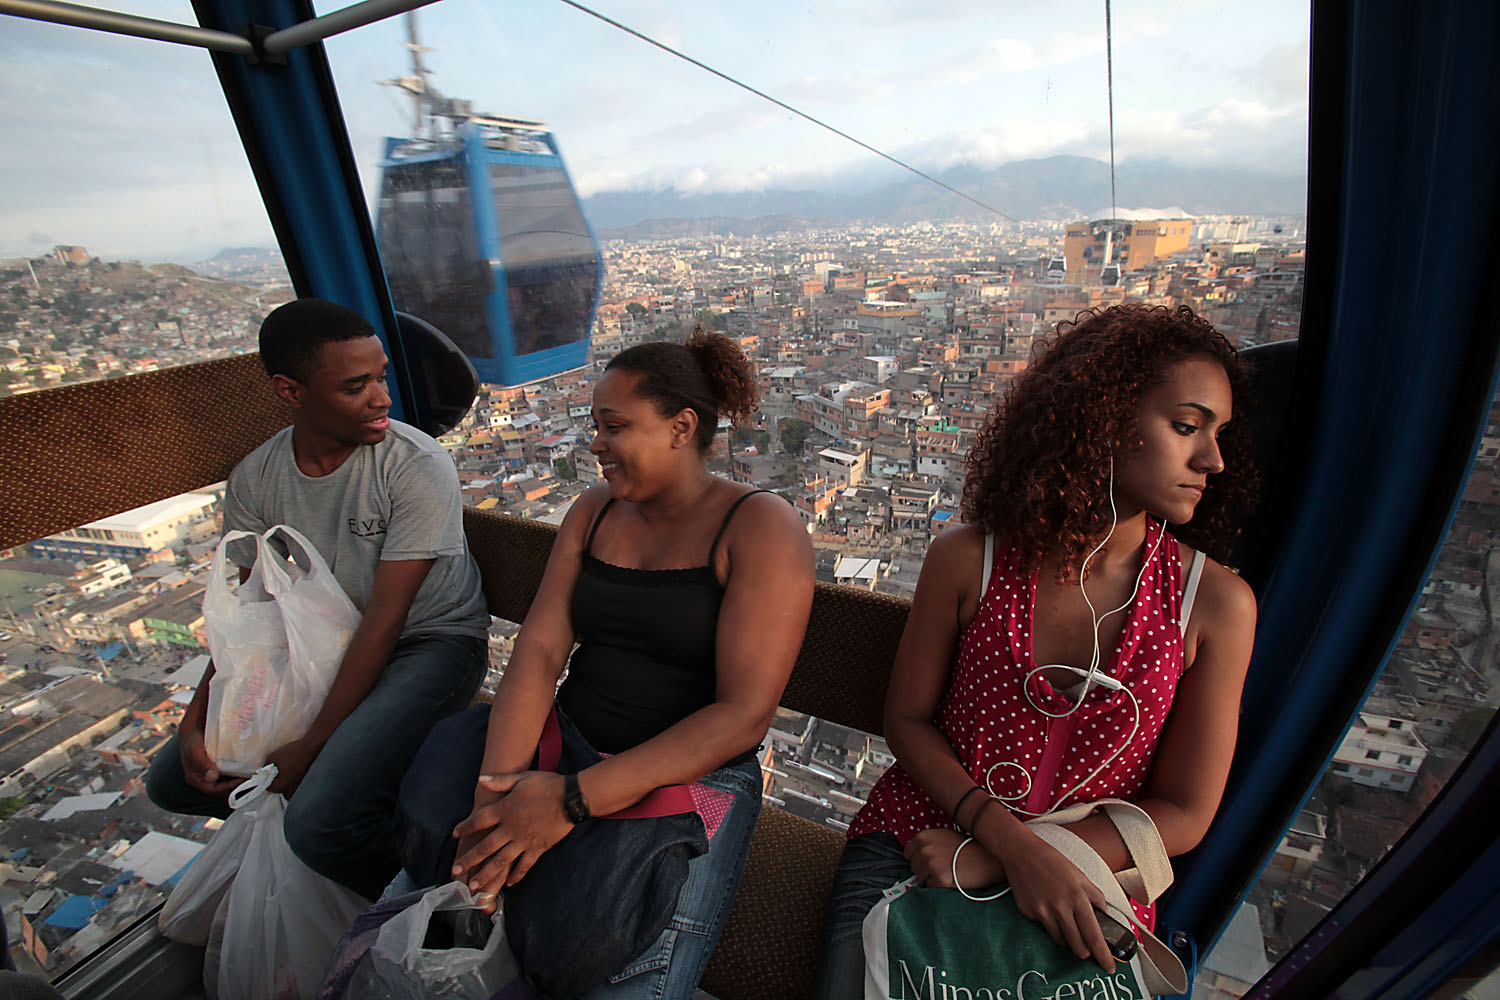 A new cable car system connects the 130,000 residents of the Complexo Alemao favela to the rest of the city.